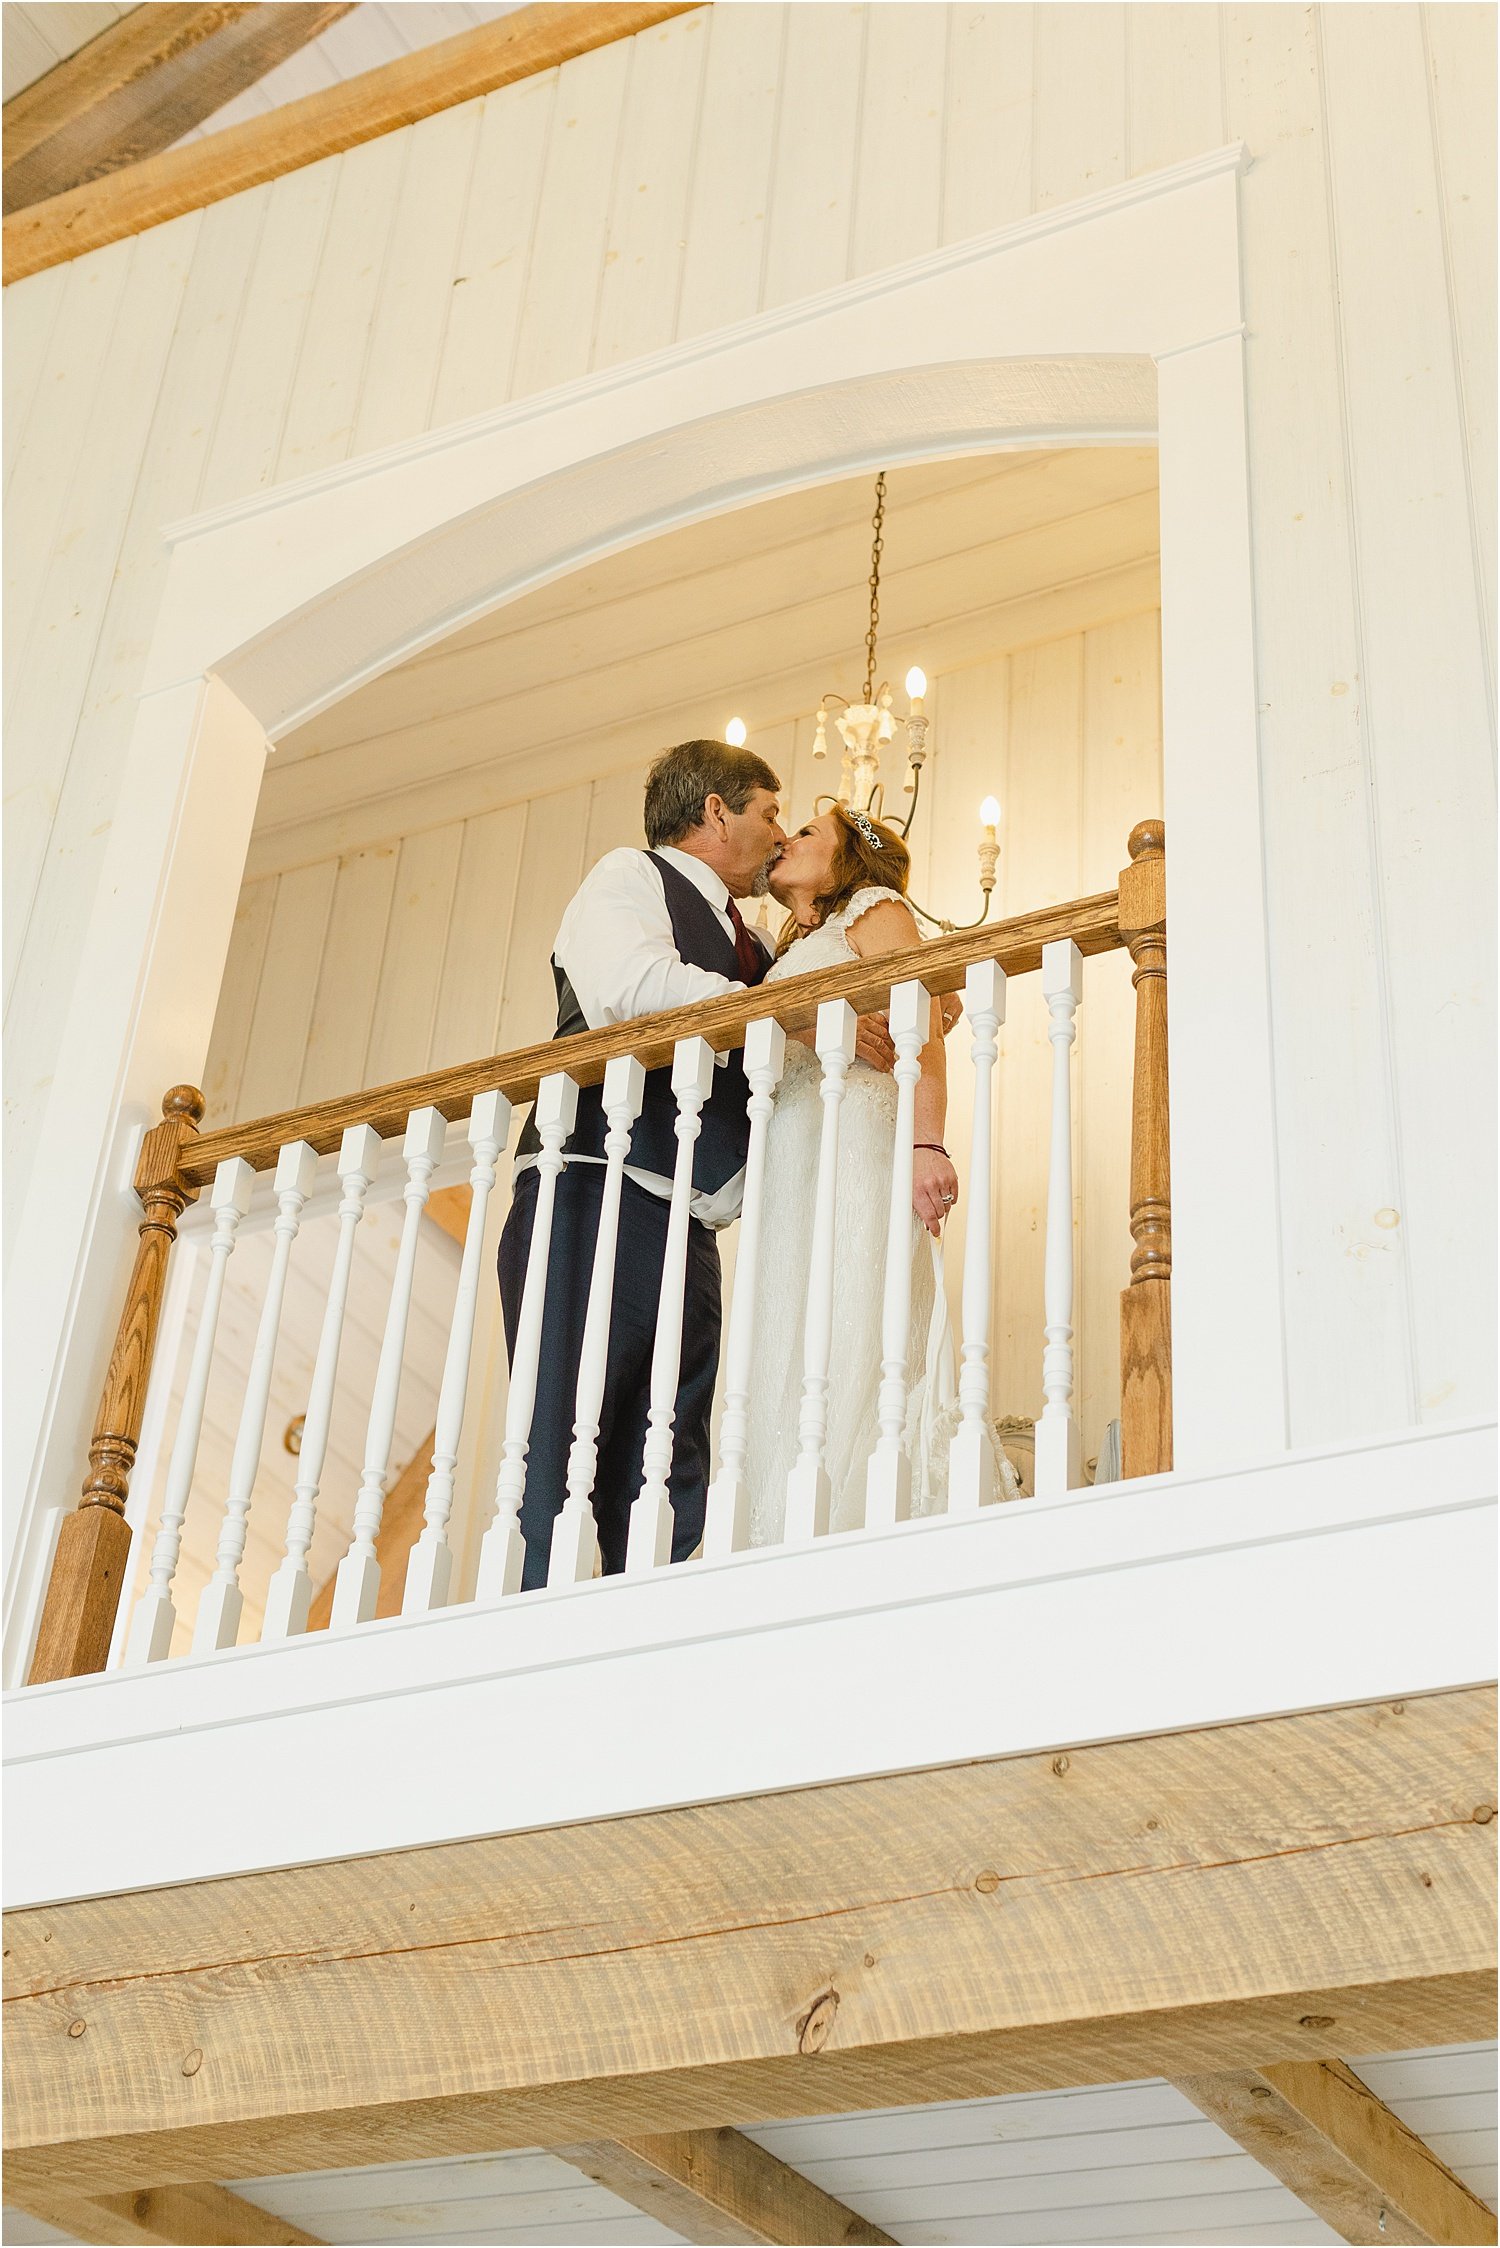 Bride and Groom Kiss at the Top of a Balcony